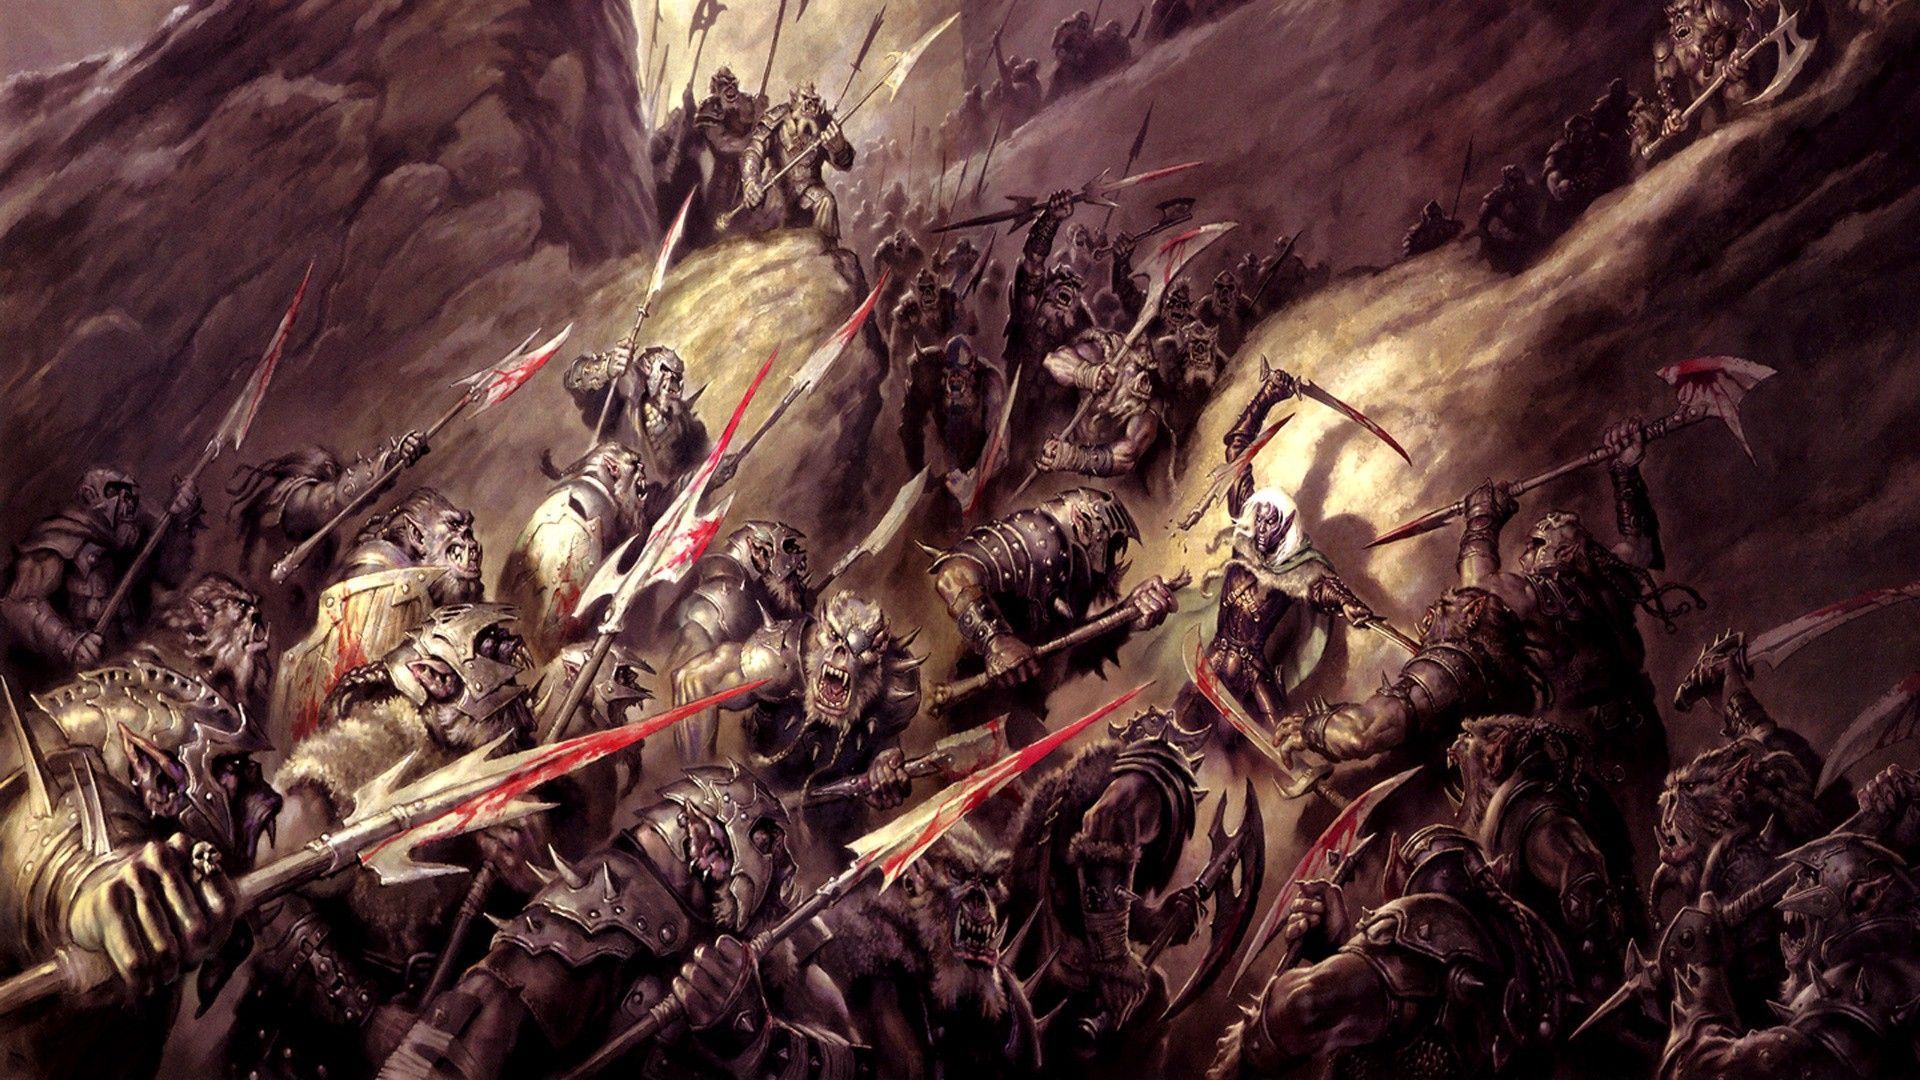 Fantasy art, armor, dnd, orcs, axes, Dungeons and Dragons, spears